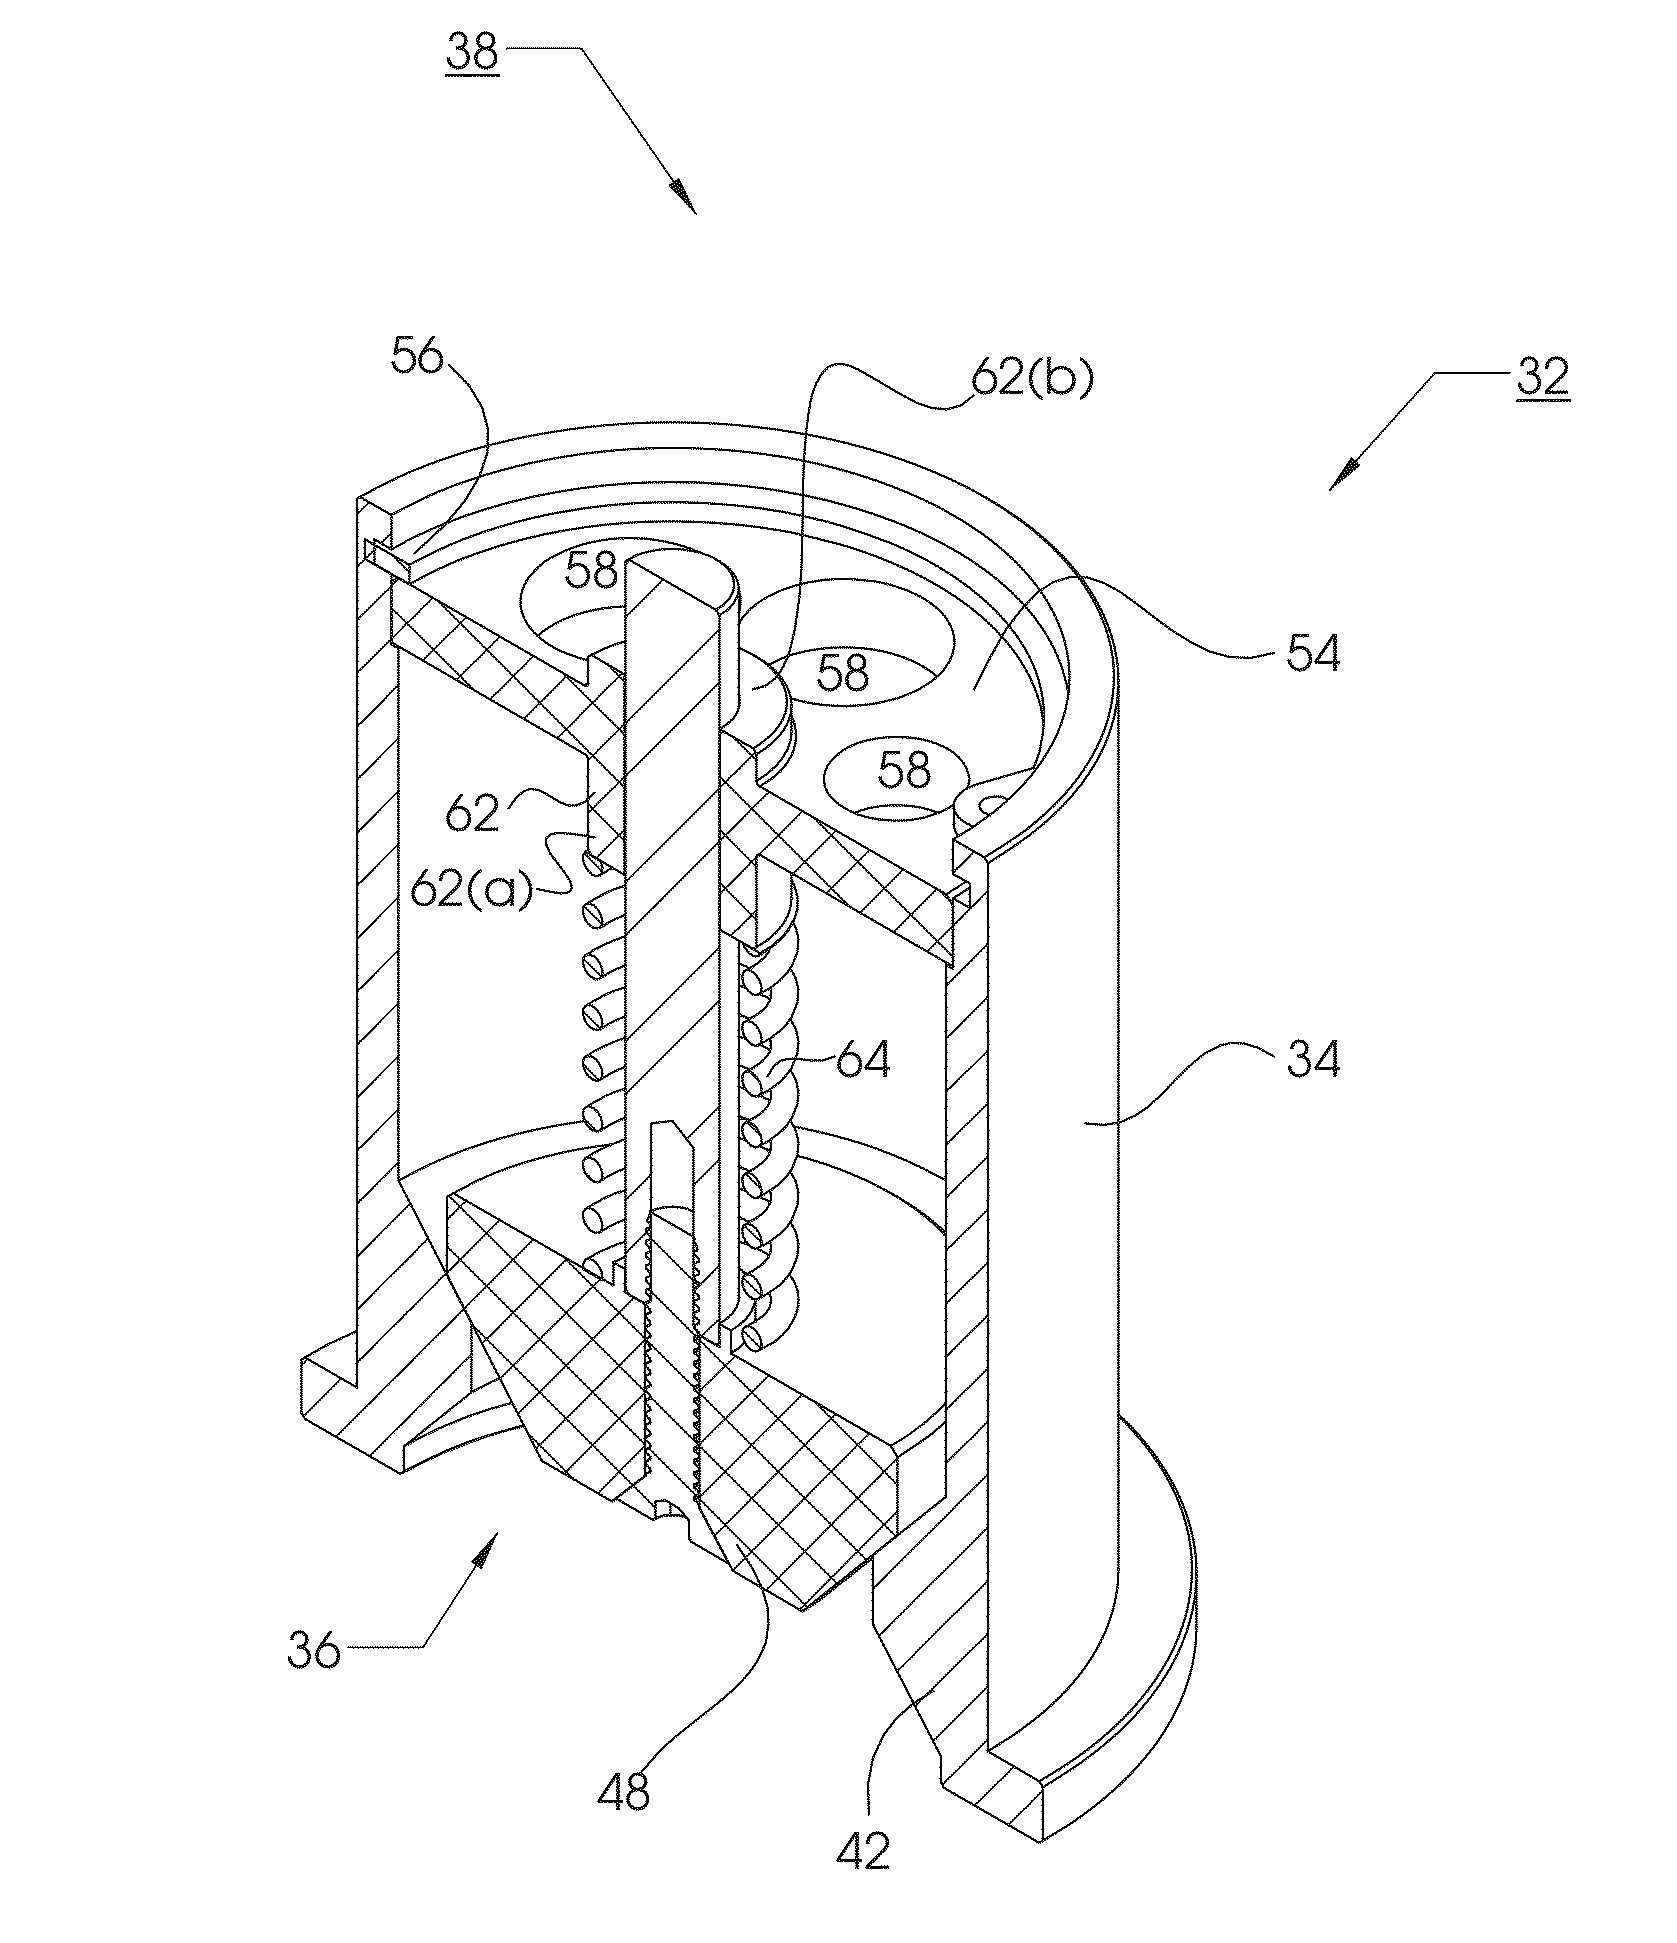 System for Increasing the Efficiency of a Water Meter